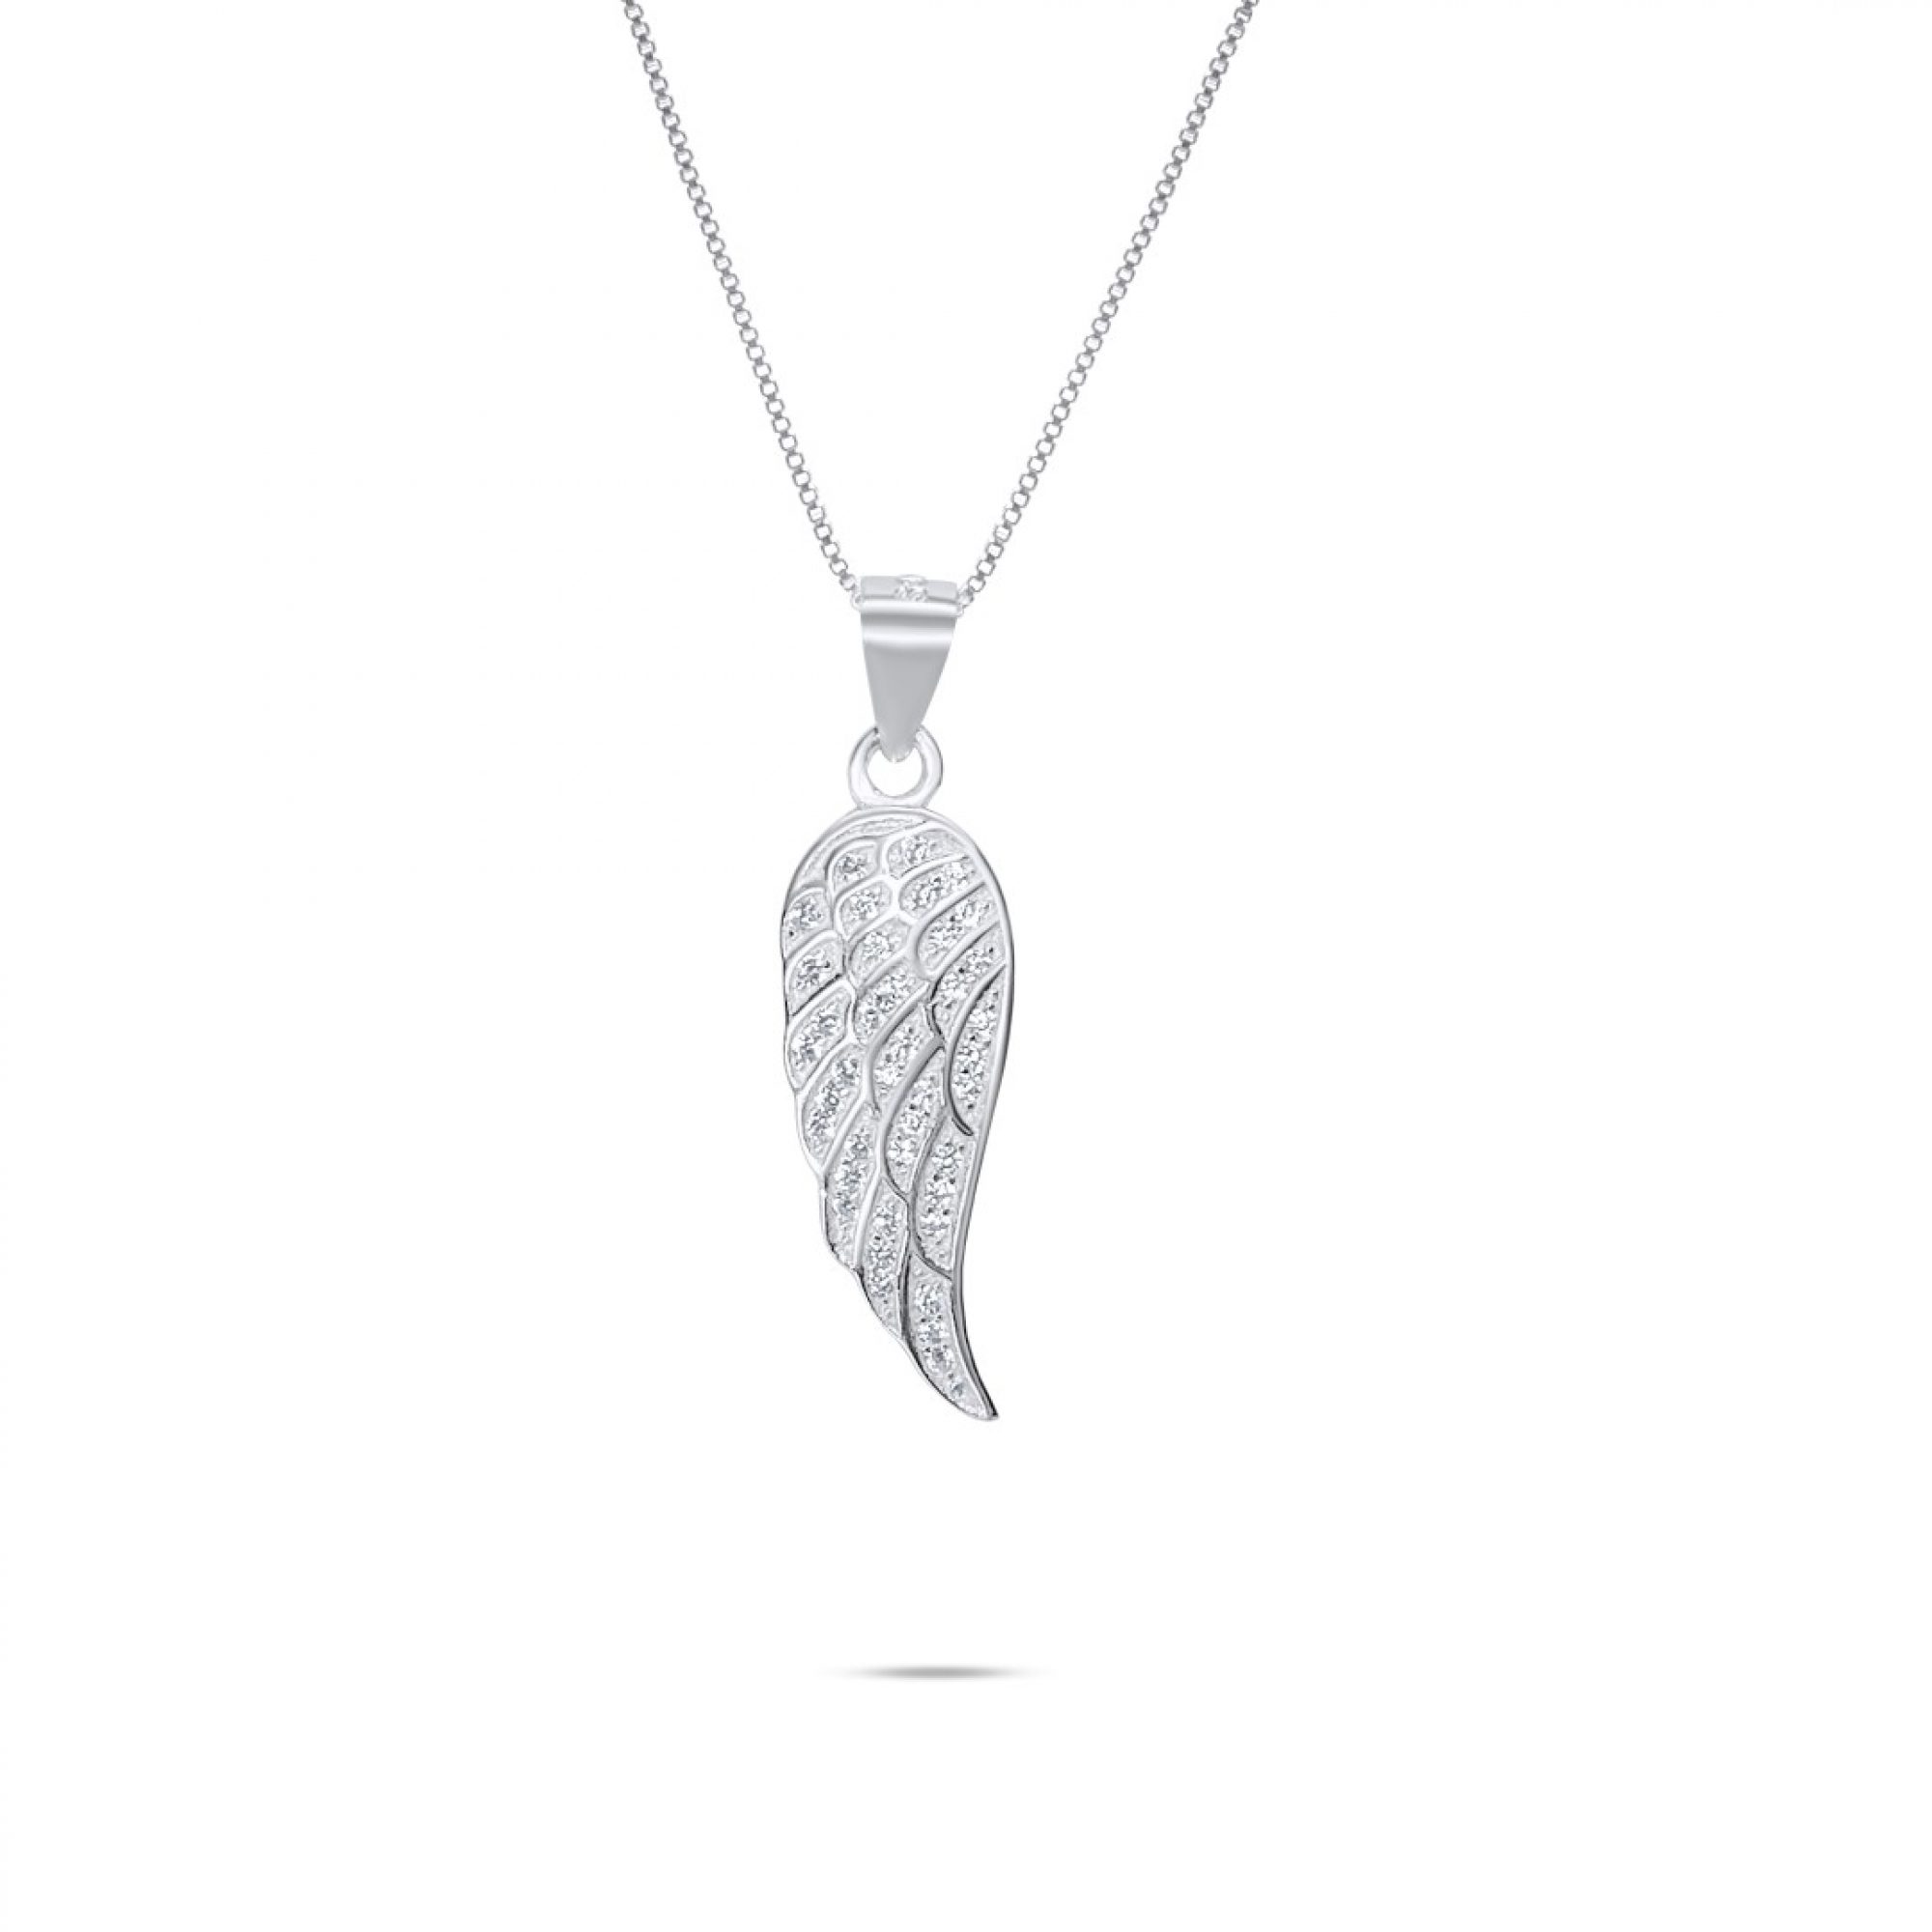 Angel wing necklace with zircon stones